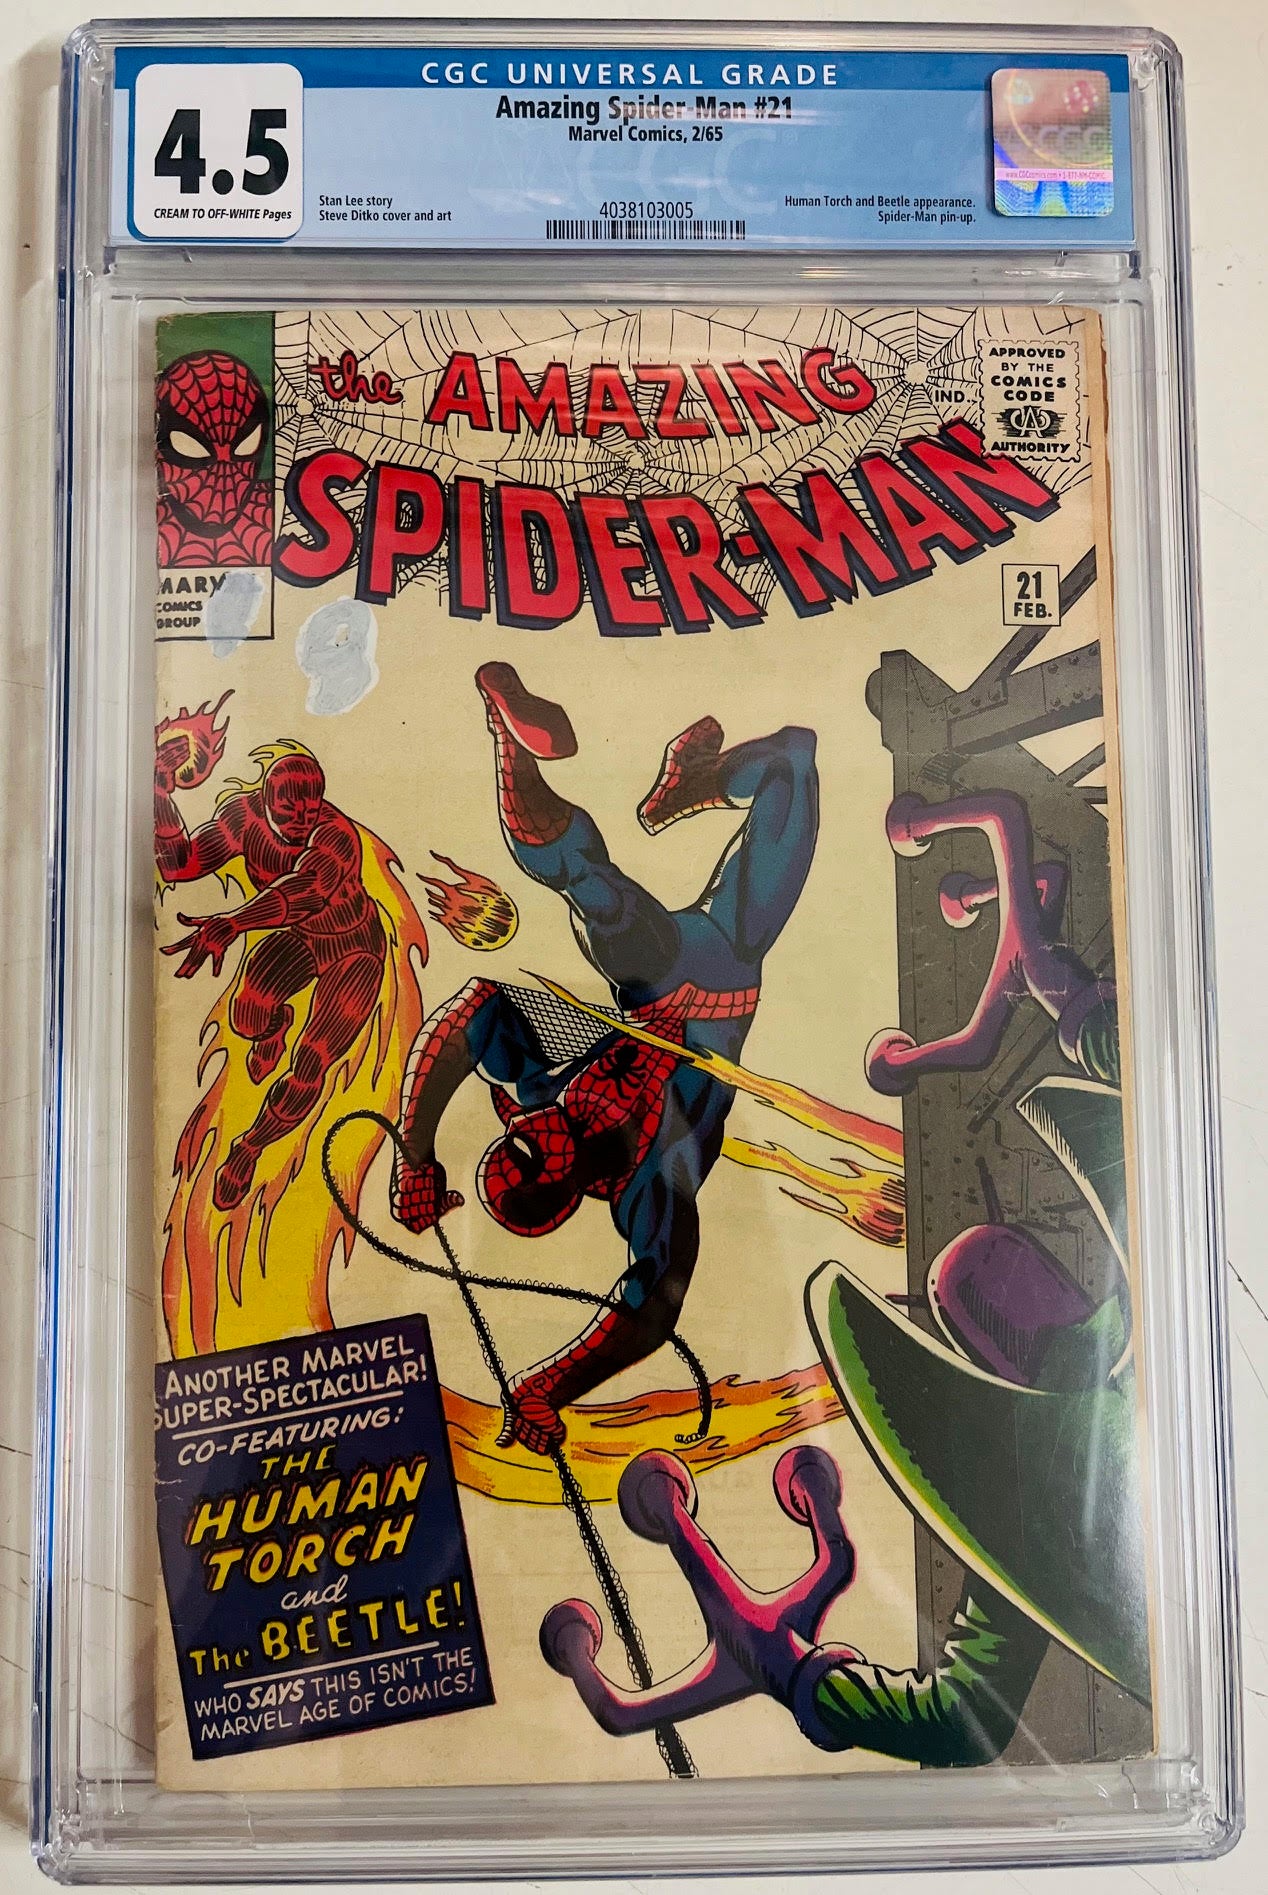 Amazing Spider-Man #21 Certified Guaranty Company (CGC) Graded 4.5 - Human Torch and Beetle Appearance